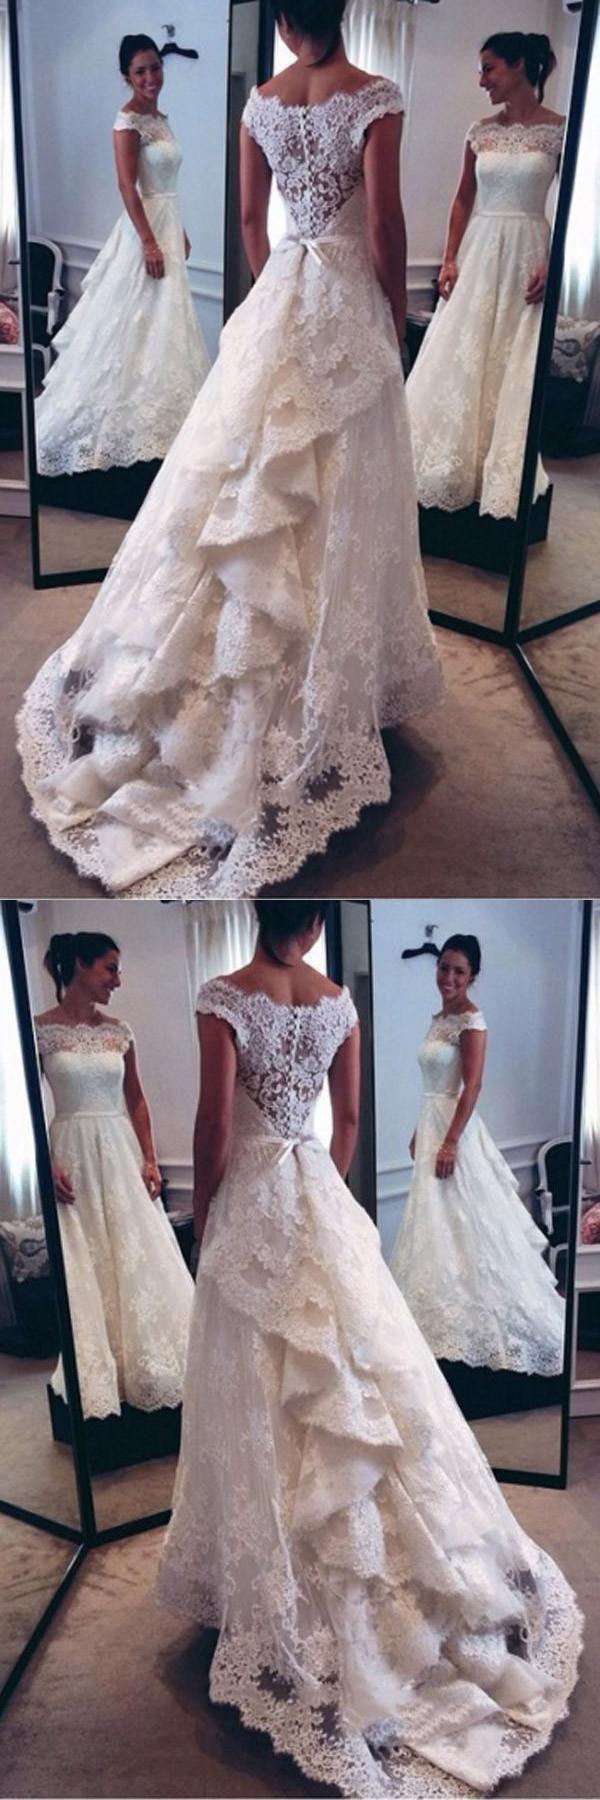 Wedding - Hot Sale Trendy Wedding Dresses Lace Classic Off-The-Shoulder Tiered Lace A-Line Wedding Dress